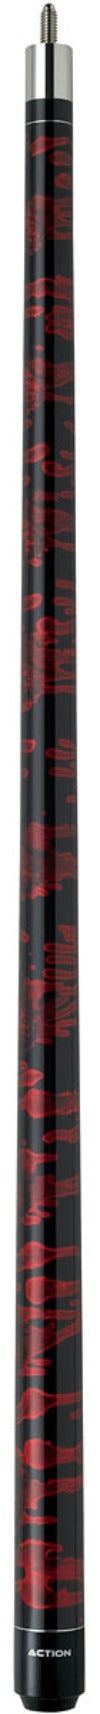 Action Action VAL03 Pool Cue Pool Cue